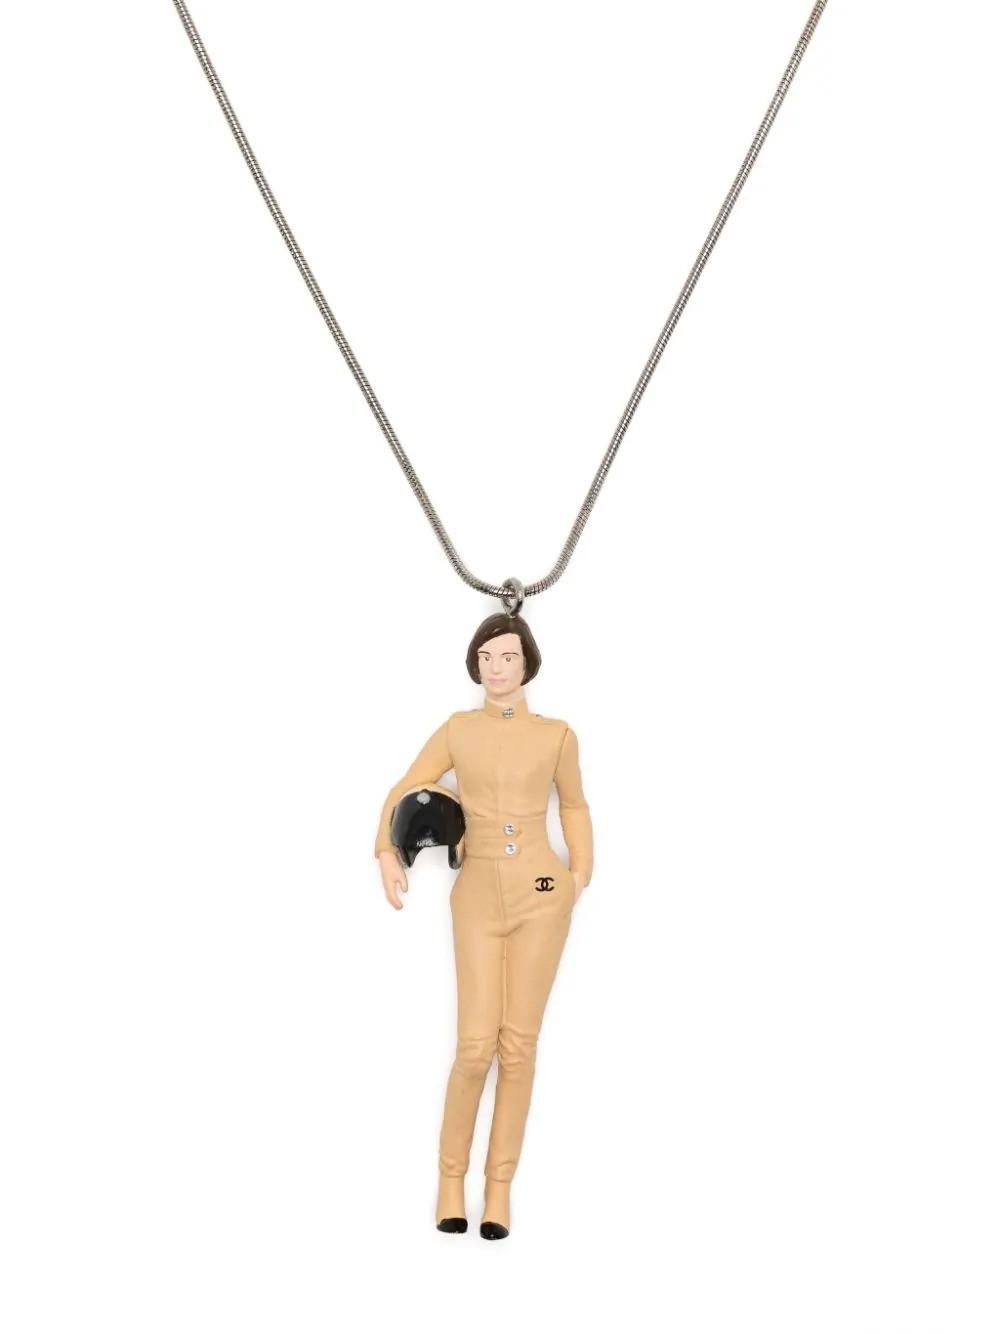 This beige necklace from Chanel features a stunning silver-plated design. With its bold and luxurious appearance, this necklace is the perfect addition to any outfit. The sleek beige colour adds sophistication and style, while the silver plating